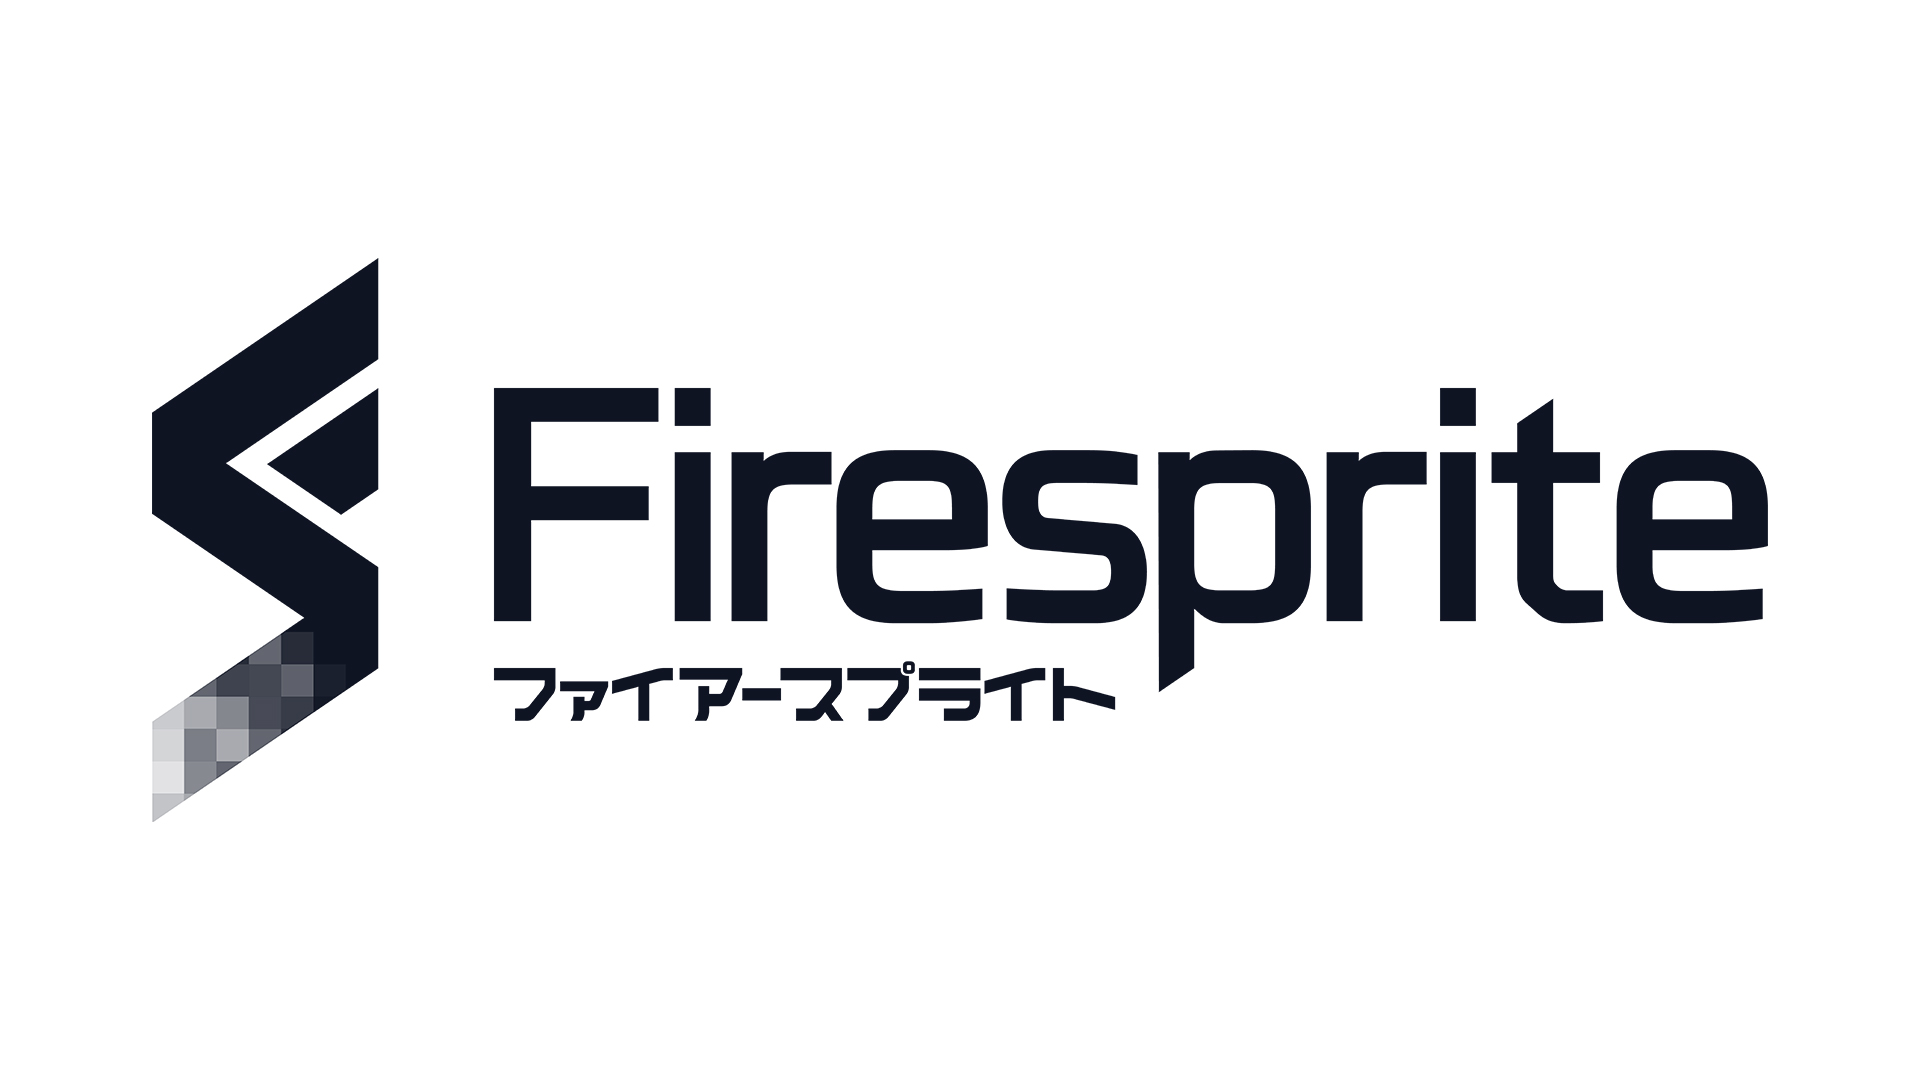 Firesprite is working on a PS5 exclusive horror game using Unreal Engine 5  - Xfire